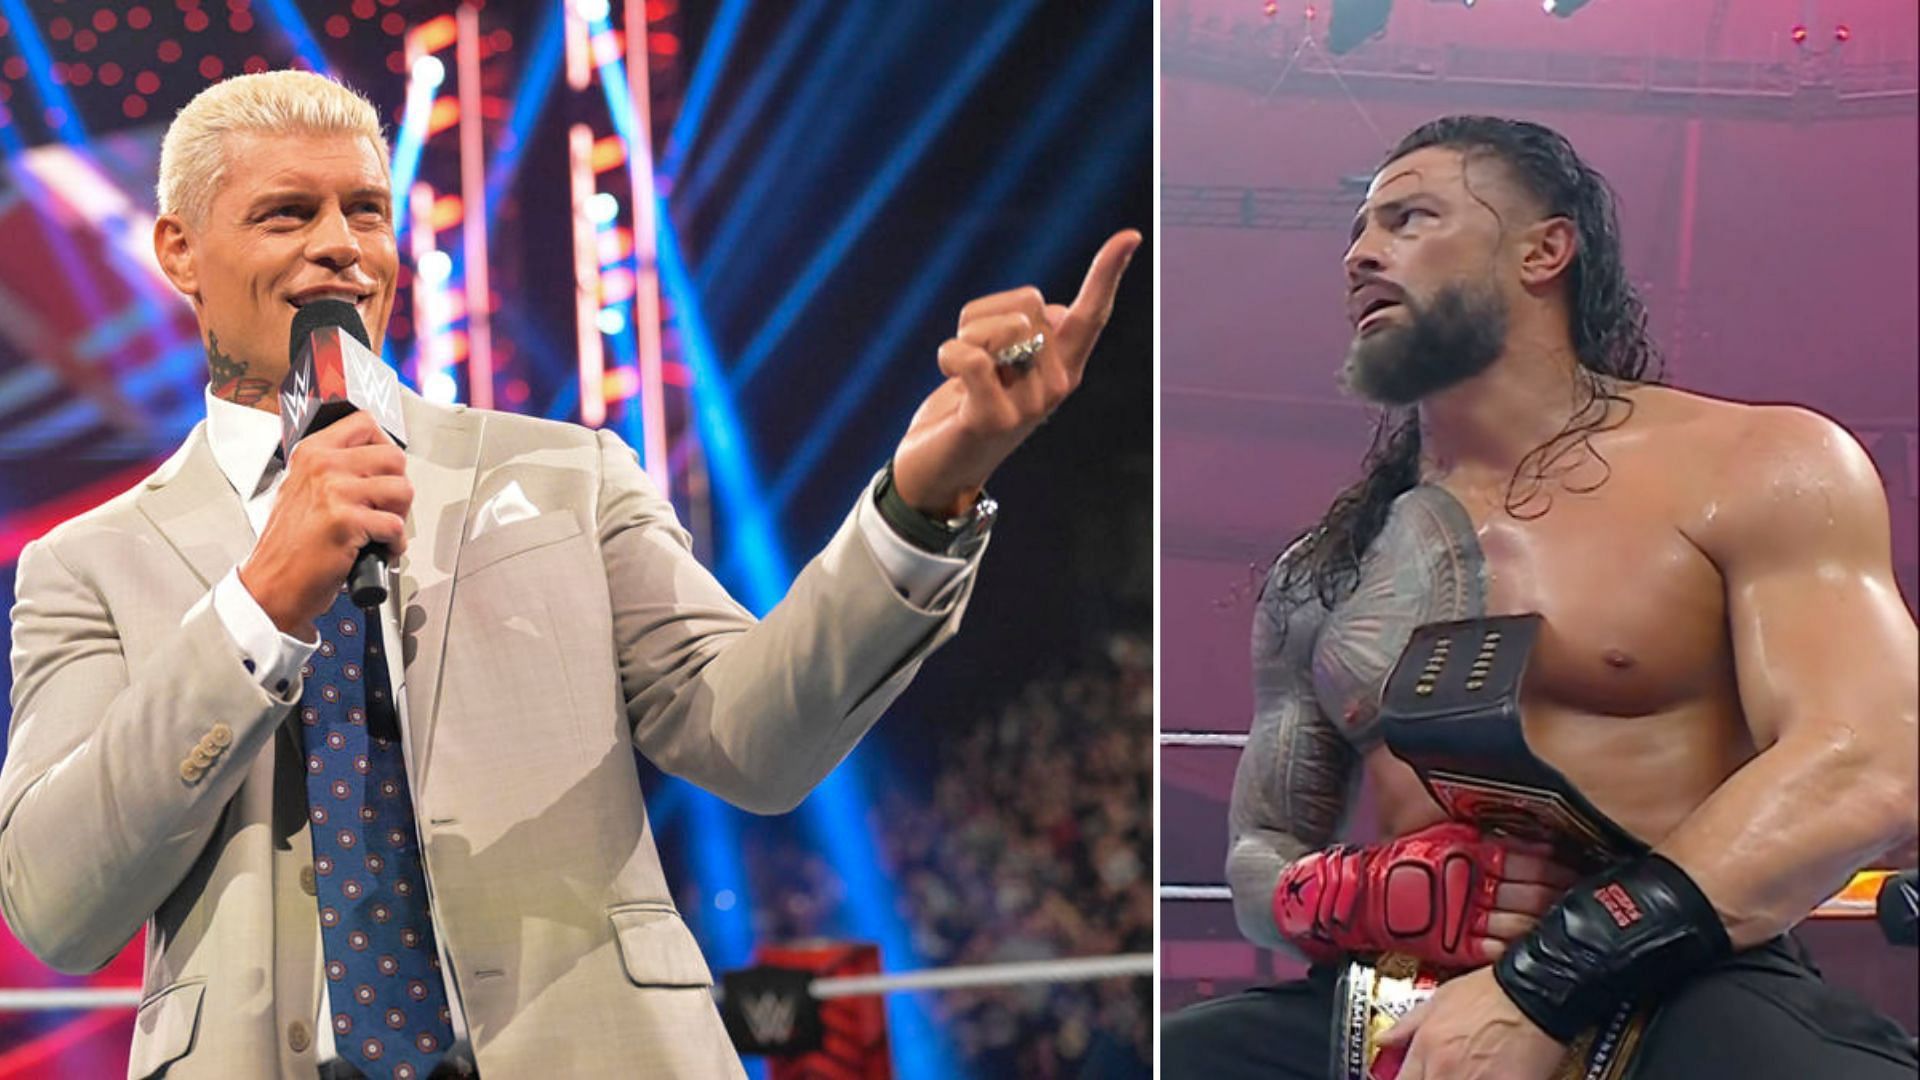 Cody Rhodes and Roman Reigns are set to lock horns at WrestleMania XL [Image credits: wwe.com and star